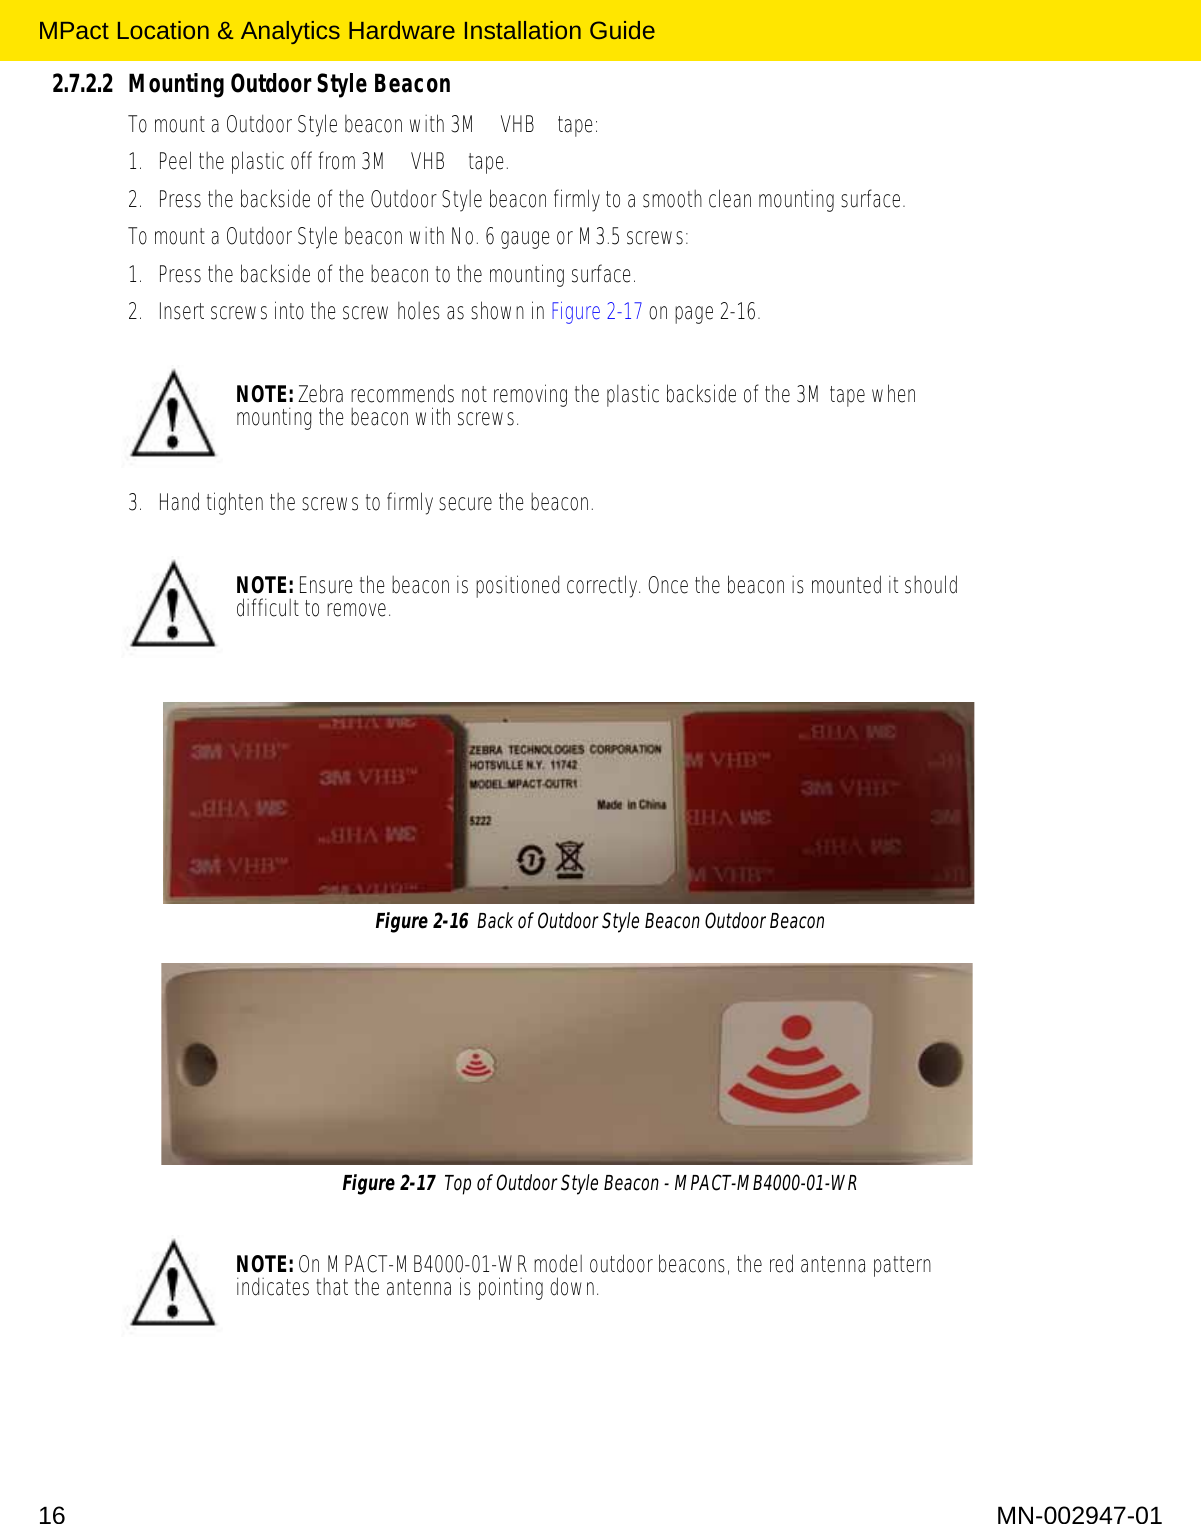 MPact Location &amp; Analytics Hardware Installation Guide16 MN-002947-012.7.2.2 Mounting Outdoor Style BeaconTo mount a Outdoor Style beacon with 3M™ VHB™ tape: 1. Peel the plastic off from 3M™ VHB™ tape. 2. Press the backside of the Outdoor Style beacon firmly to a smooth clean mounting surface. To mount a Outdoor Style beacon with No. 6 gauge or M3.5 screws: 1. Press the backside of the beacon to the mounting surface. 2. Insert screws into the screw holes as shown in Figure 2-17 on page 2-16. 3. Hand tighten the screws to firmly secure the beacon.Figure 2-16  Back of Outdoor Style Beacon Outdoor BeaconFigure 2-17  Top of Outdoor Style Beacon - MPACT-MB4000-01-WR NOTE: Zebra recommends not removing the plastic backside of the 3M tape when mounting the beacon with screws.NOTE: Ensure the beacon is positioned correctly. Once the beacon is mounted it should difficult to remove. NOTE: On MPACT-MB4000-01-WR model outdoor beacons, the red antenna pattern indicates that the antenna is pointing down.